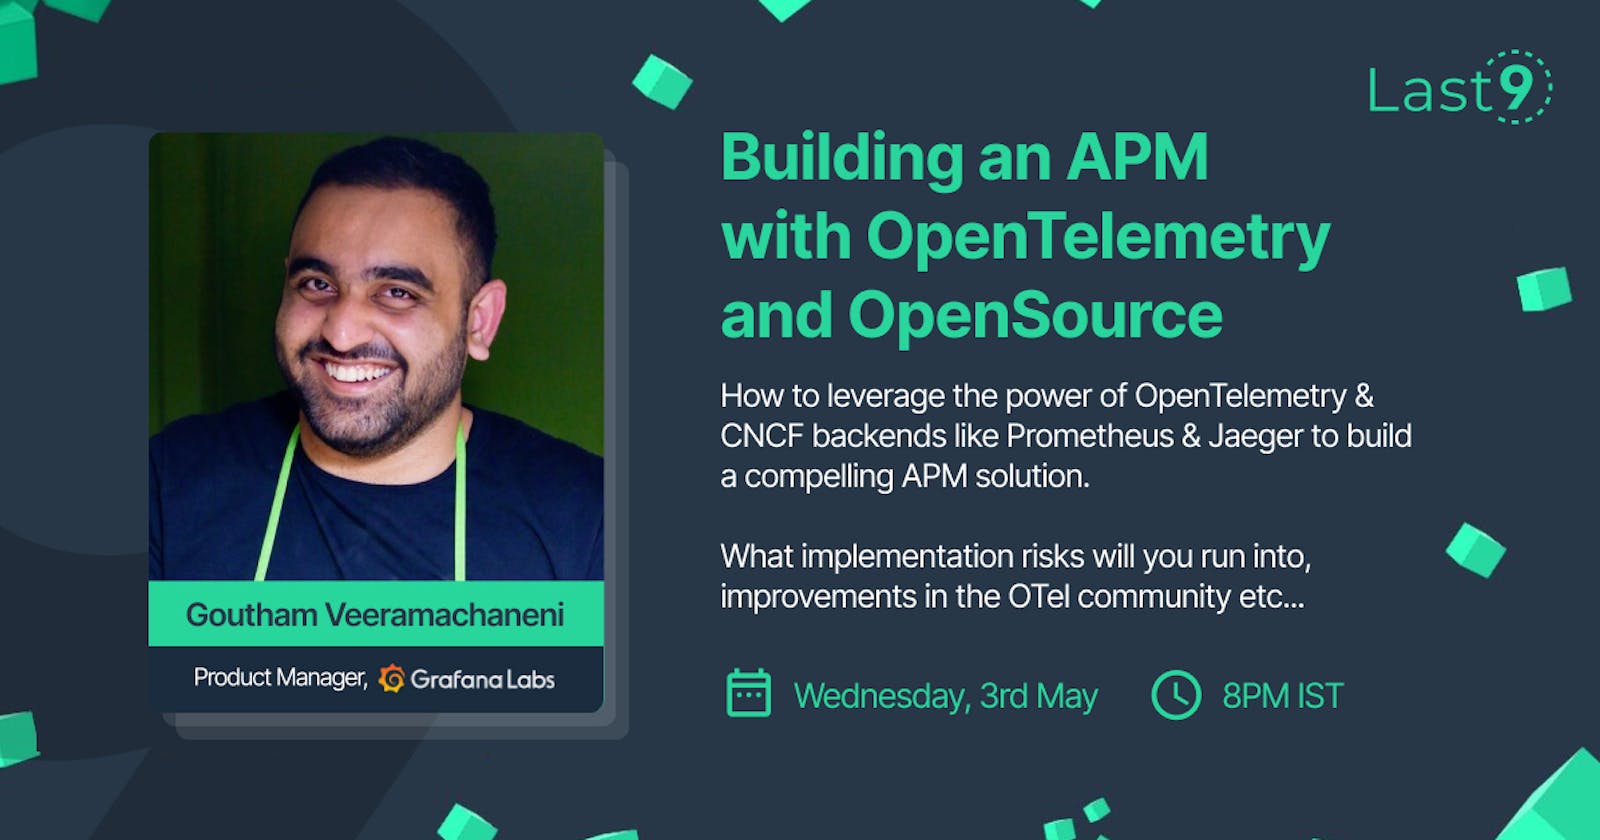 Event Report: Building an APM with OpenTelemetry and OpenSource